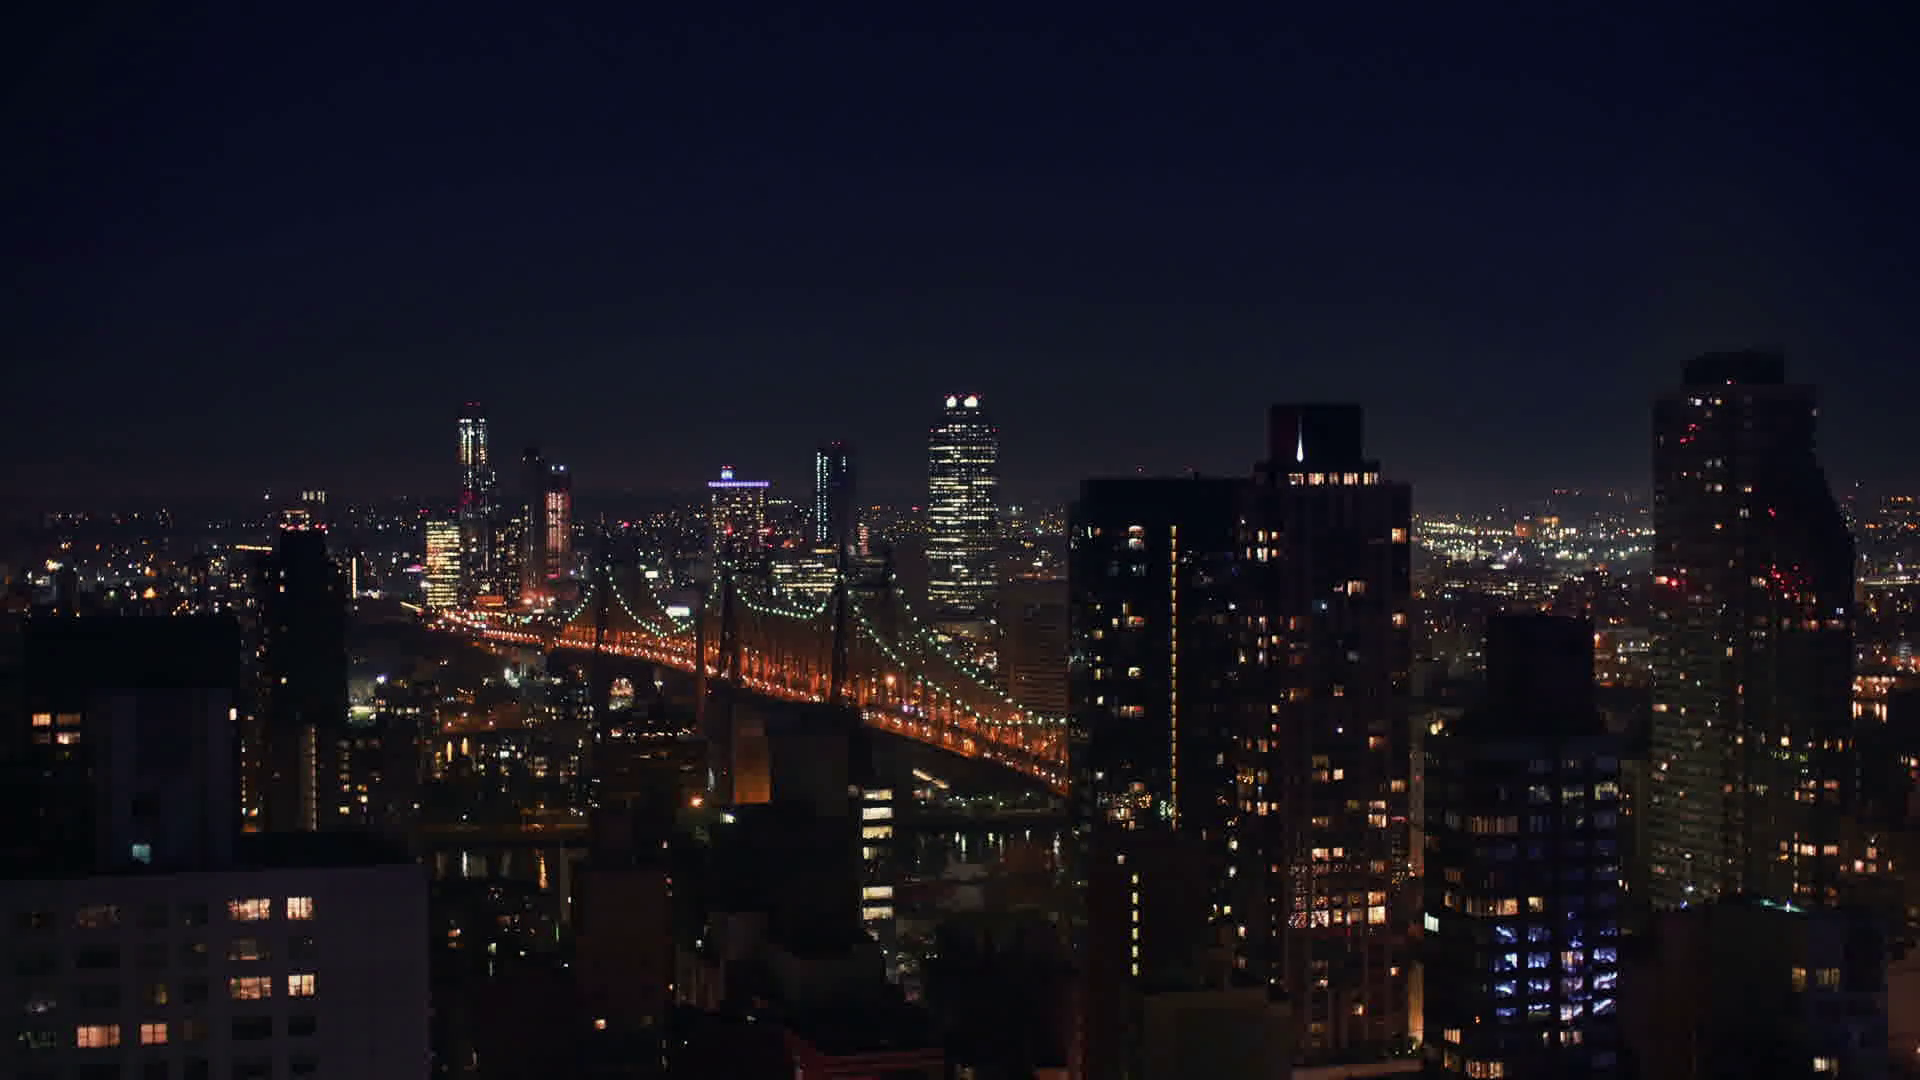 NYC at night from an apartment balcony overlooking Queensboro Bridge ...